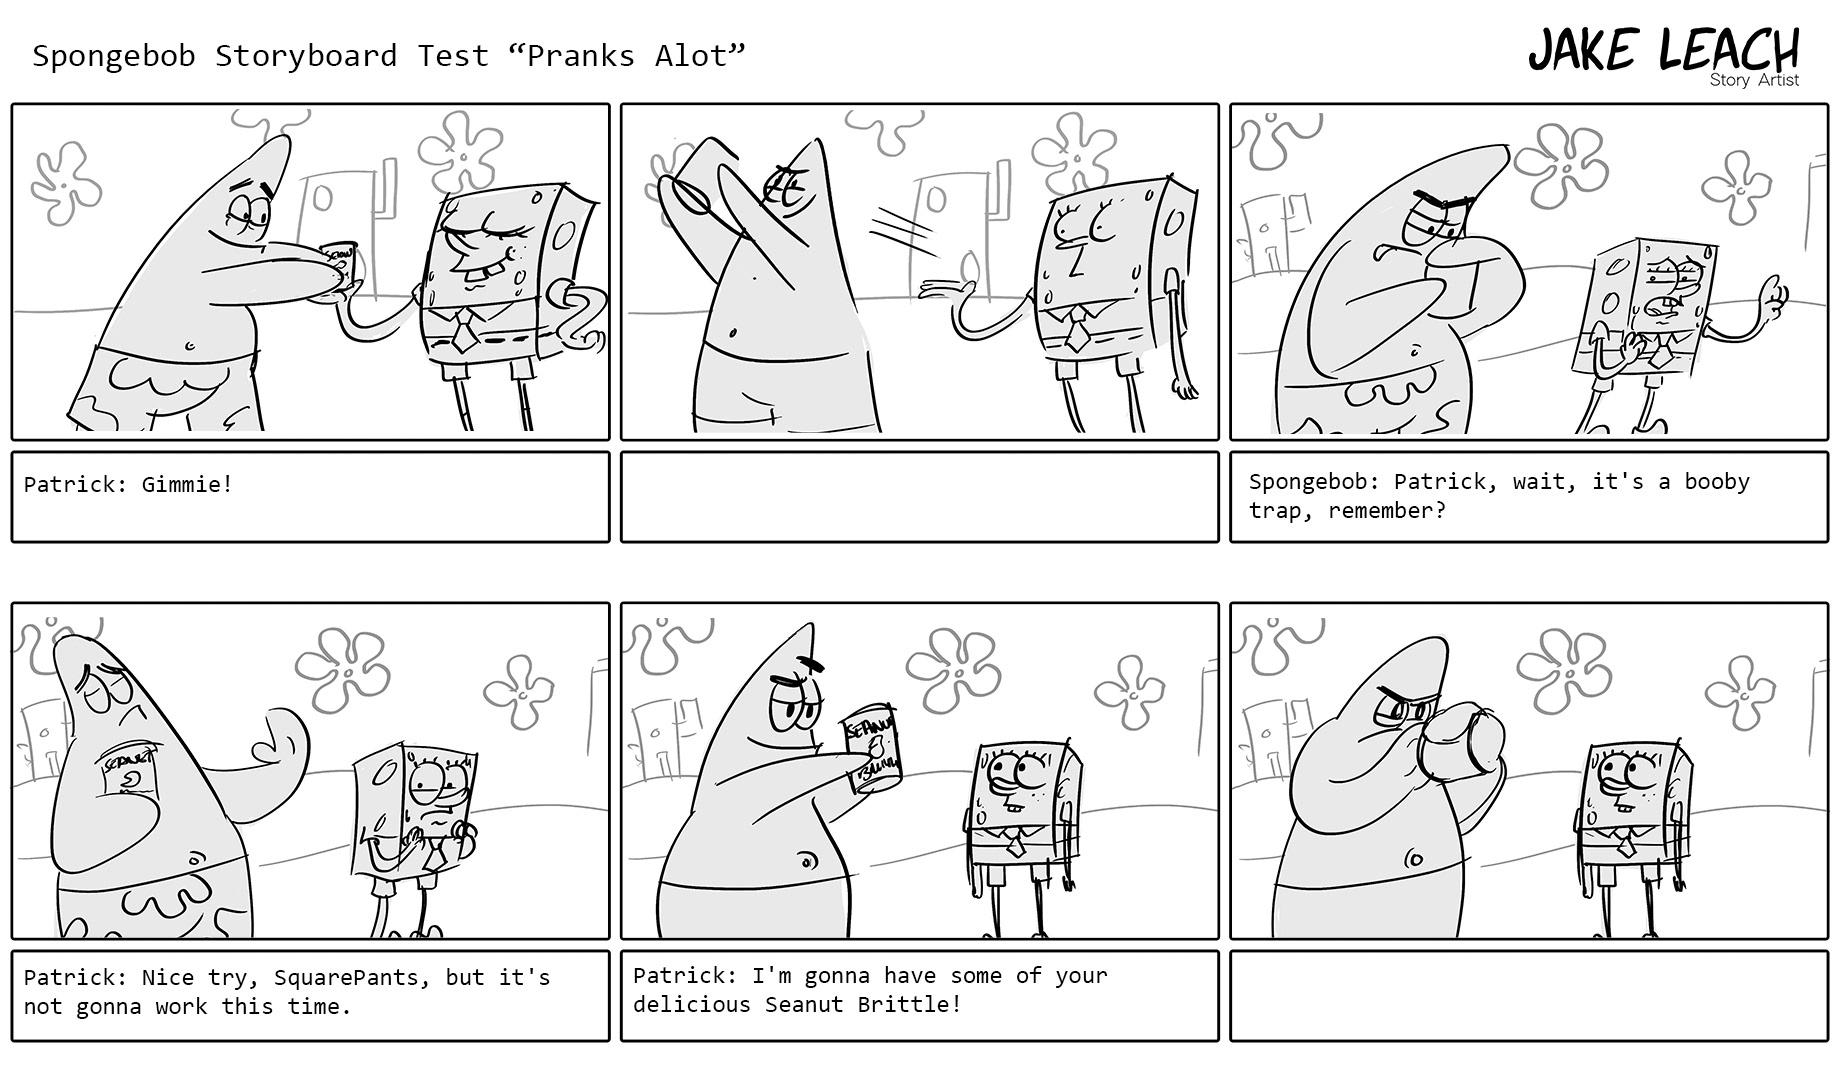 Ｔｒｉｋｉ－Ｔｒ 0 ｙ ! ! ! COMMISSIONS OPEN! on X: i found this cool storyboard  image of a episode of spongebob hehehe looks funny   / X